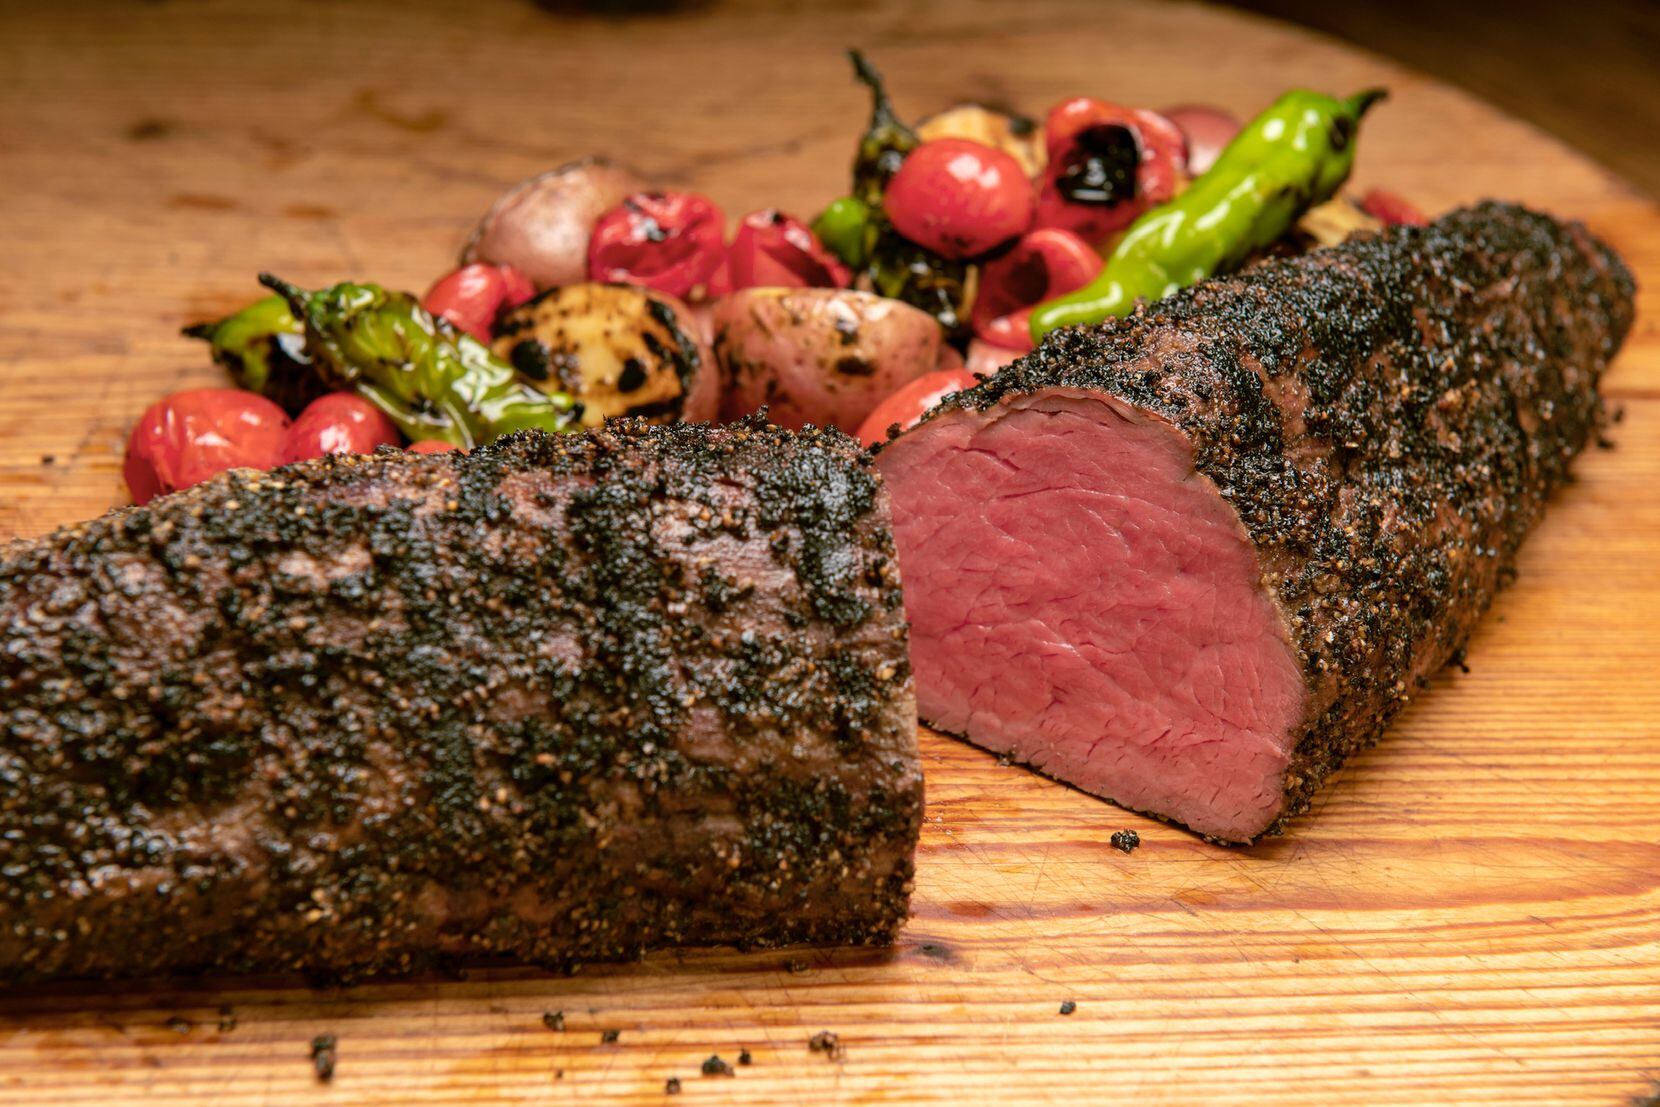 Perini Ranch Mesquite Smoked Peppered Beef Tenderloin is available for order online.